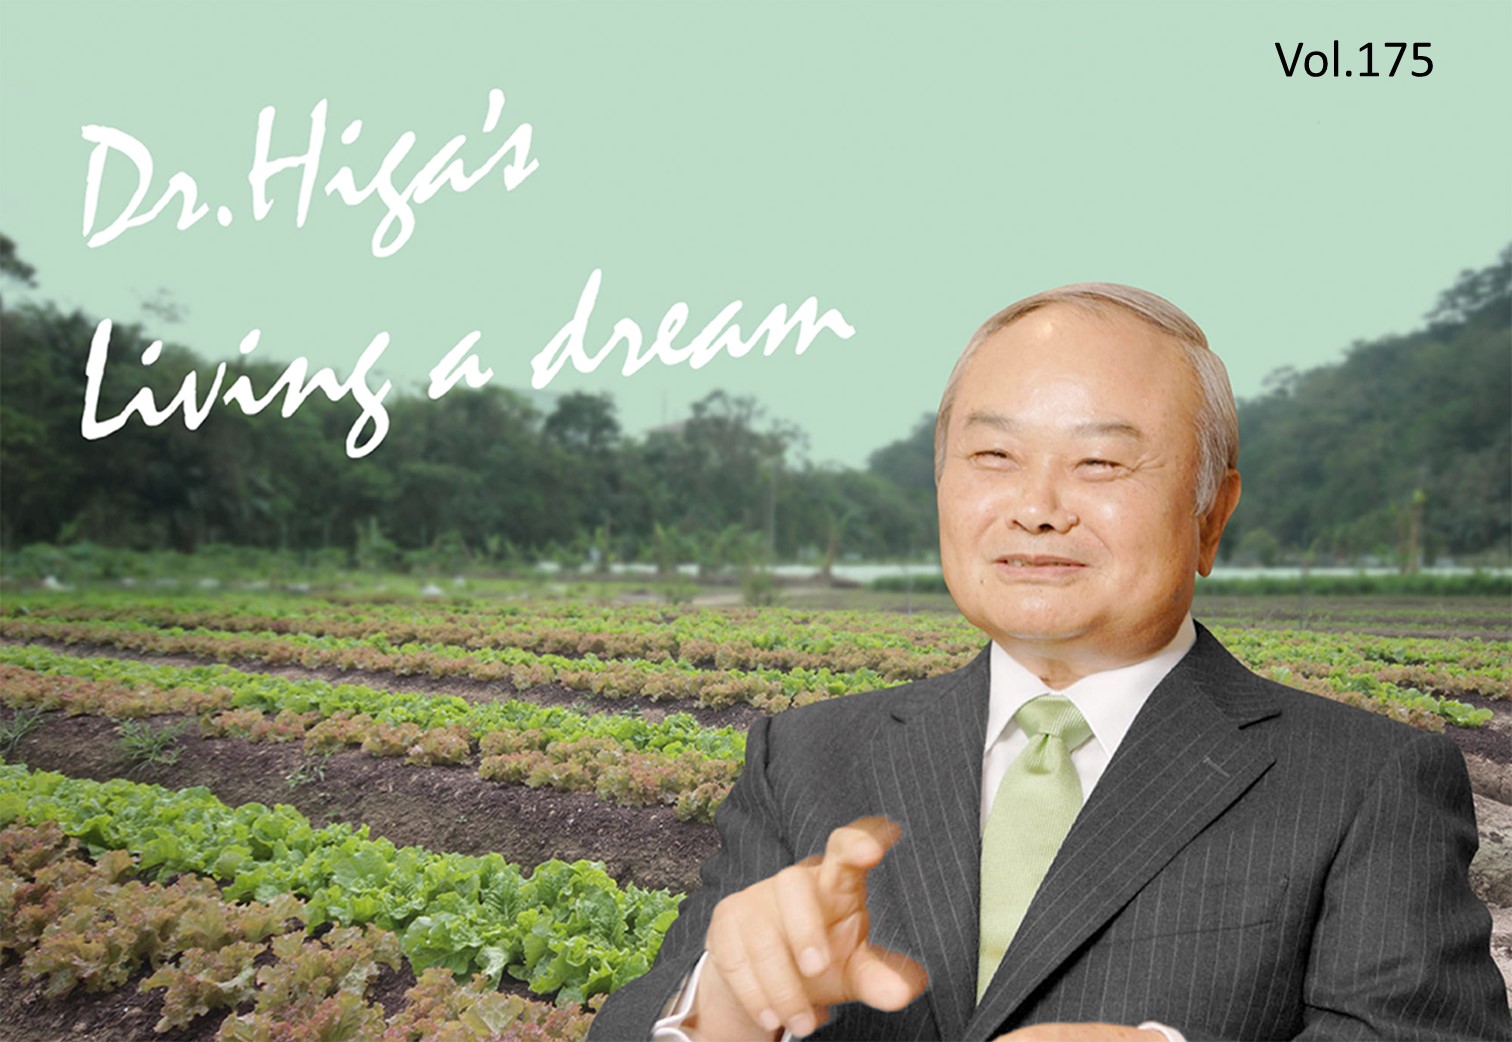 Dr. Higa's "Living a Dream": the latest article #176 is up!!!